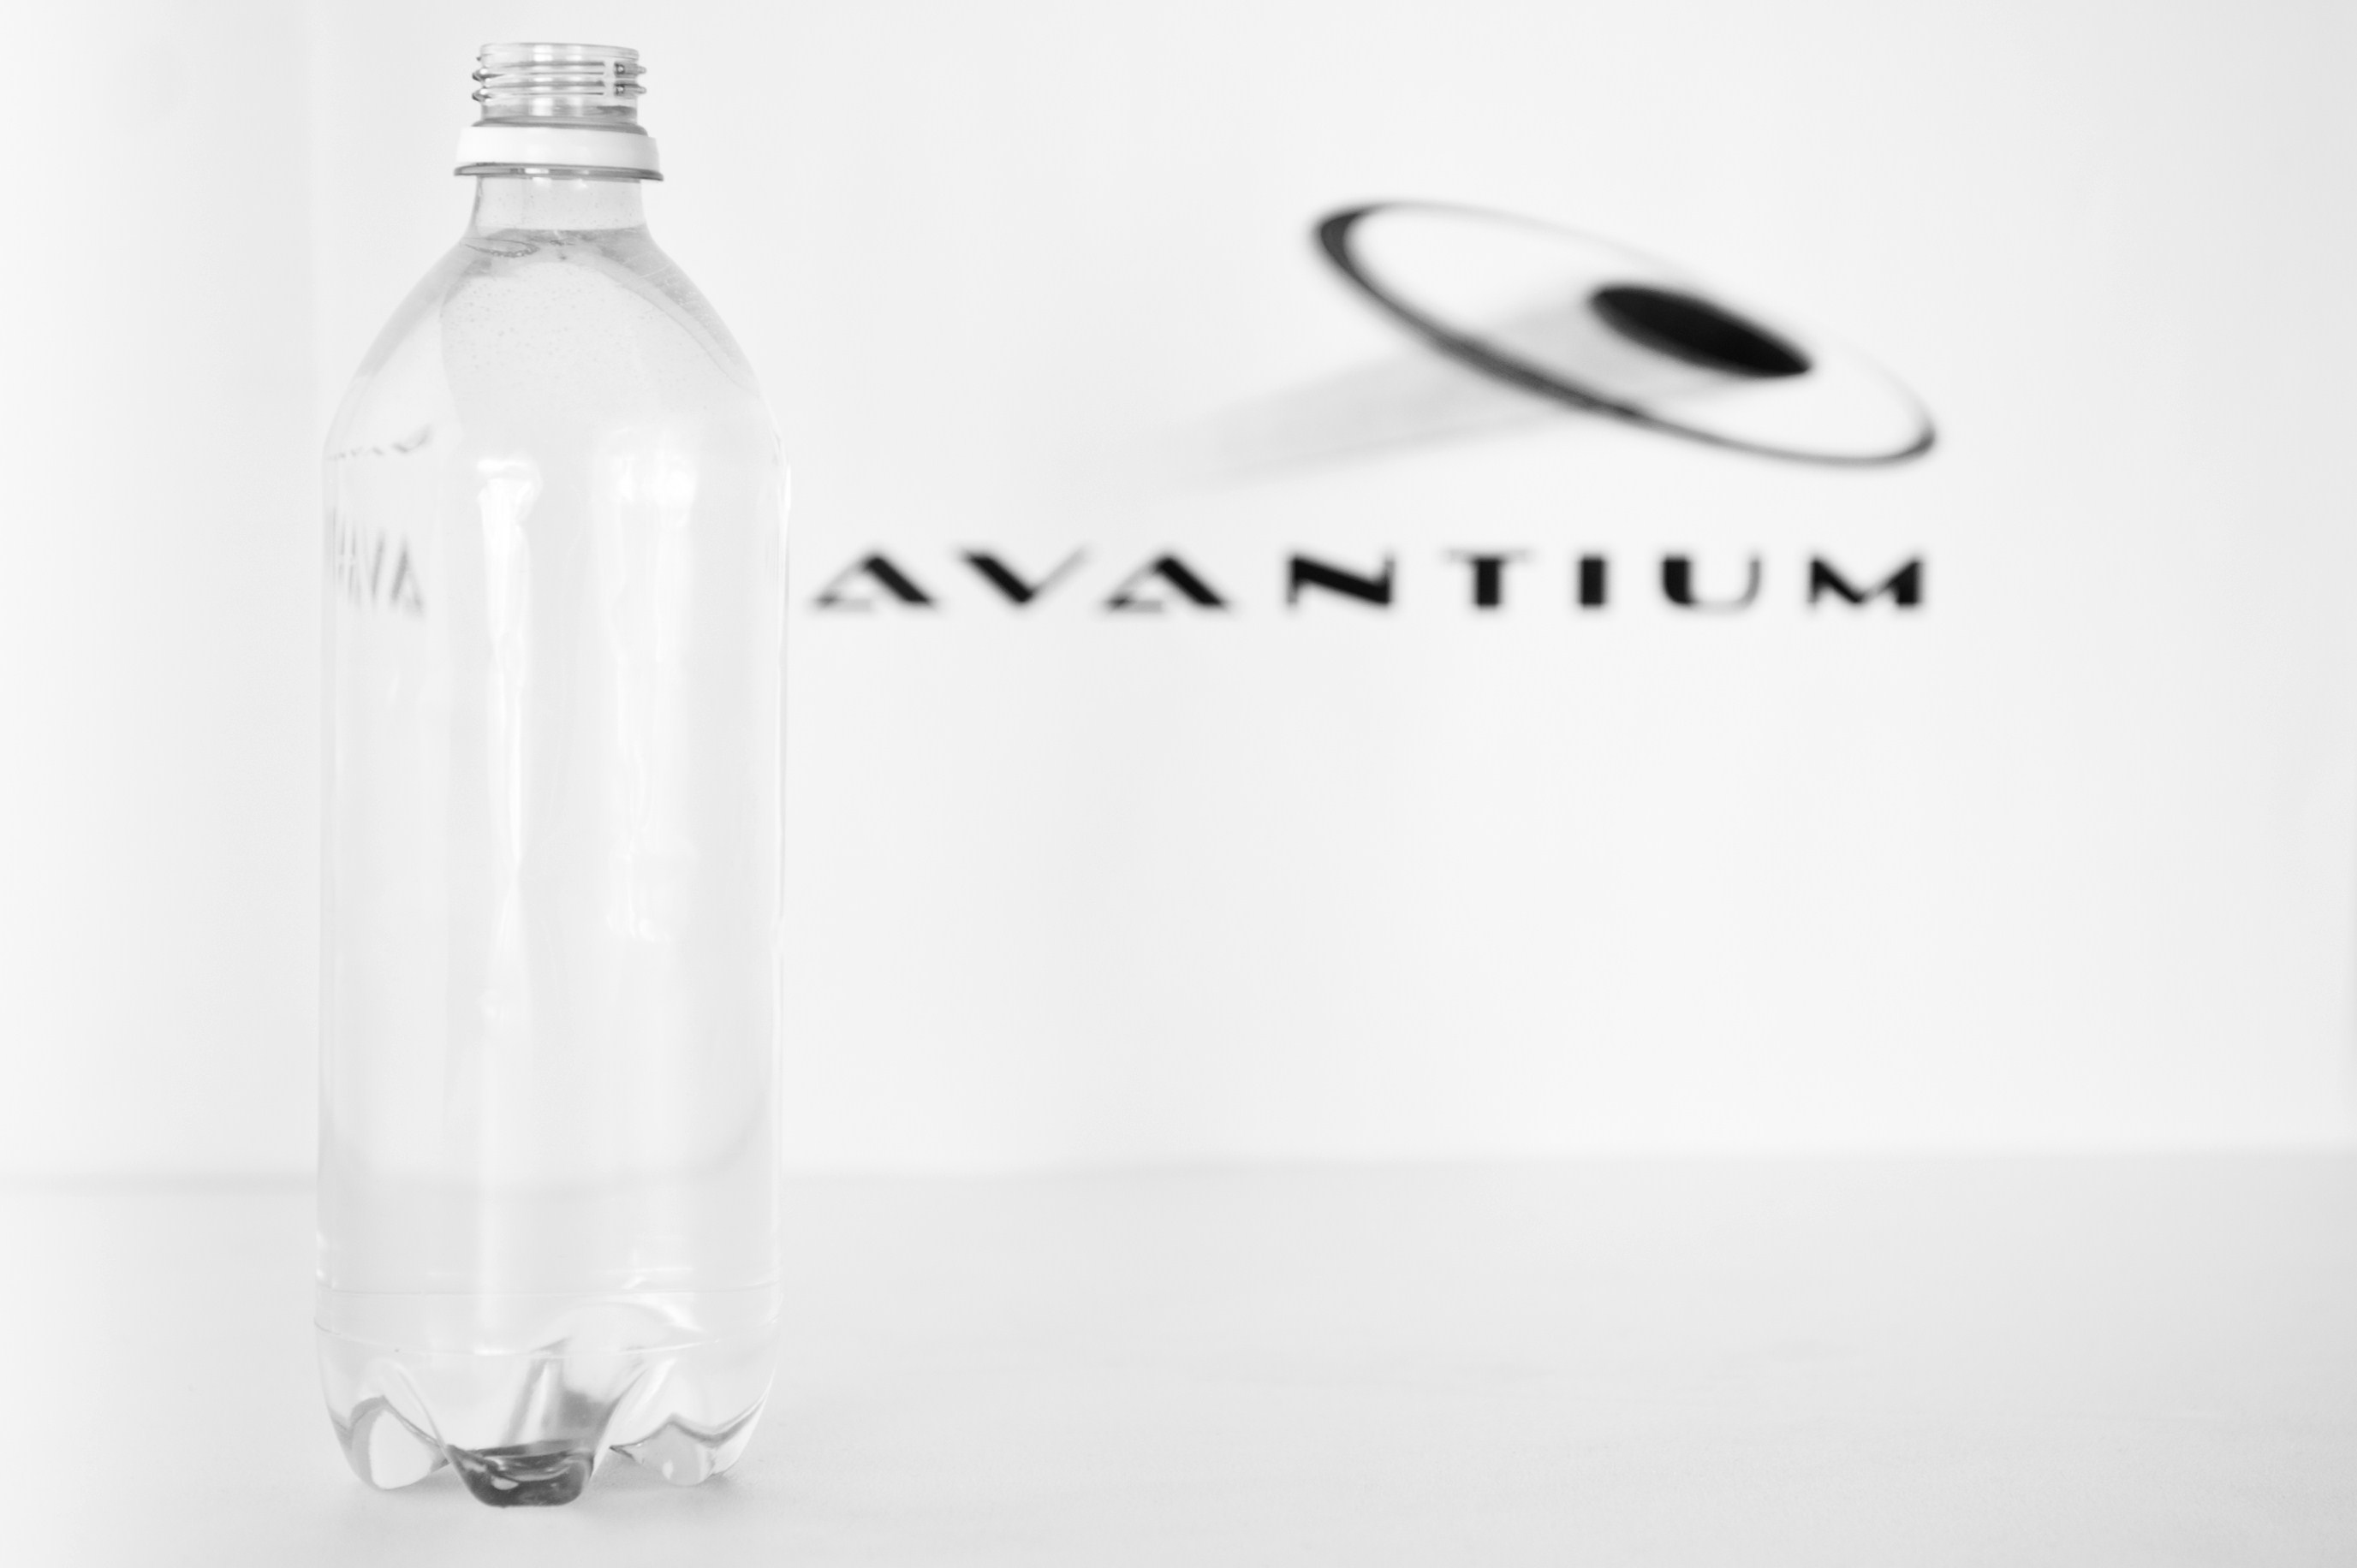 Avantium provides plant-based PEF to produce recyclable packaging